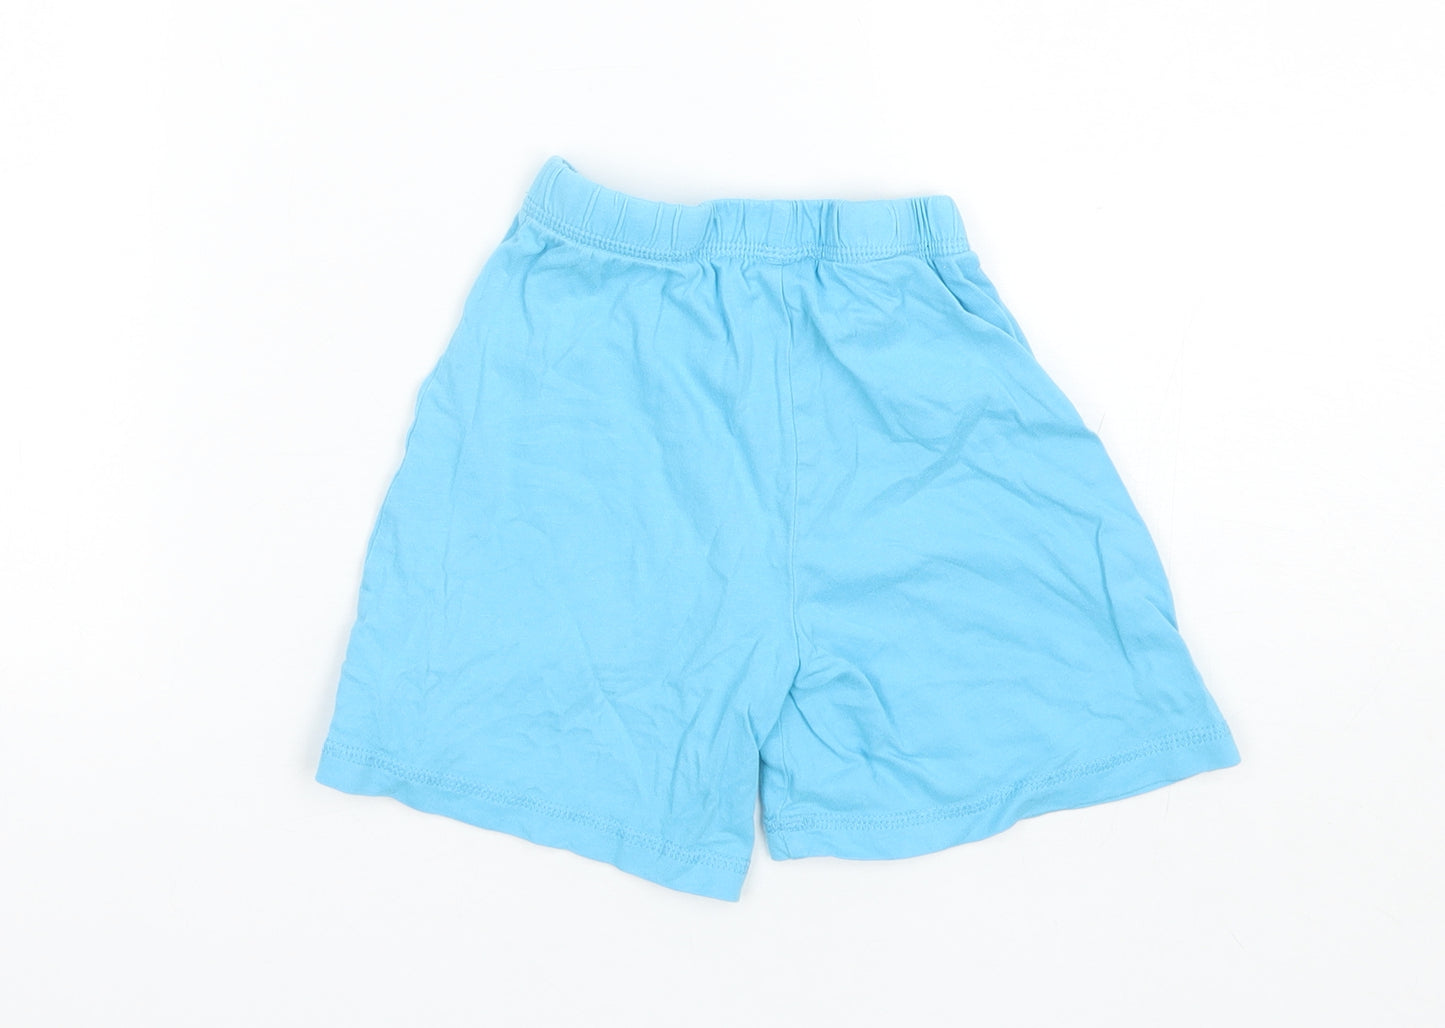 George Boys Blue Solid Cotton  Sleep Shorts Size 5-6 Years